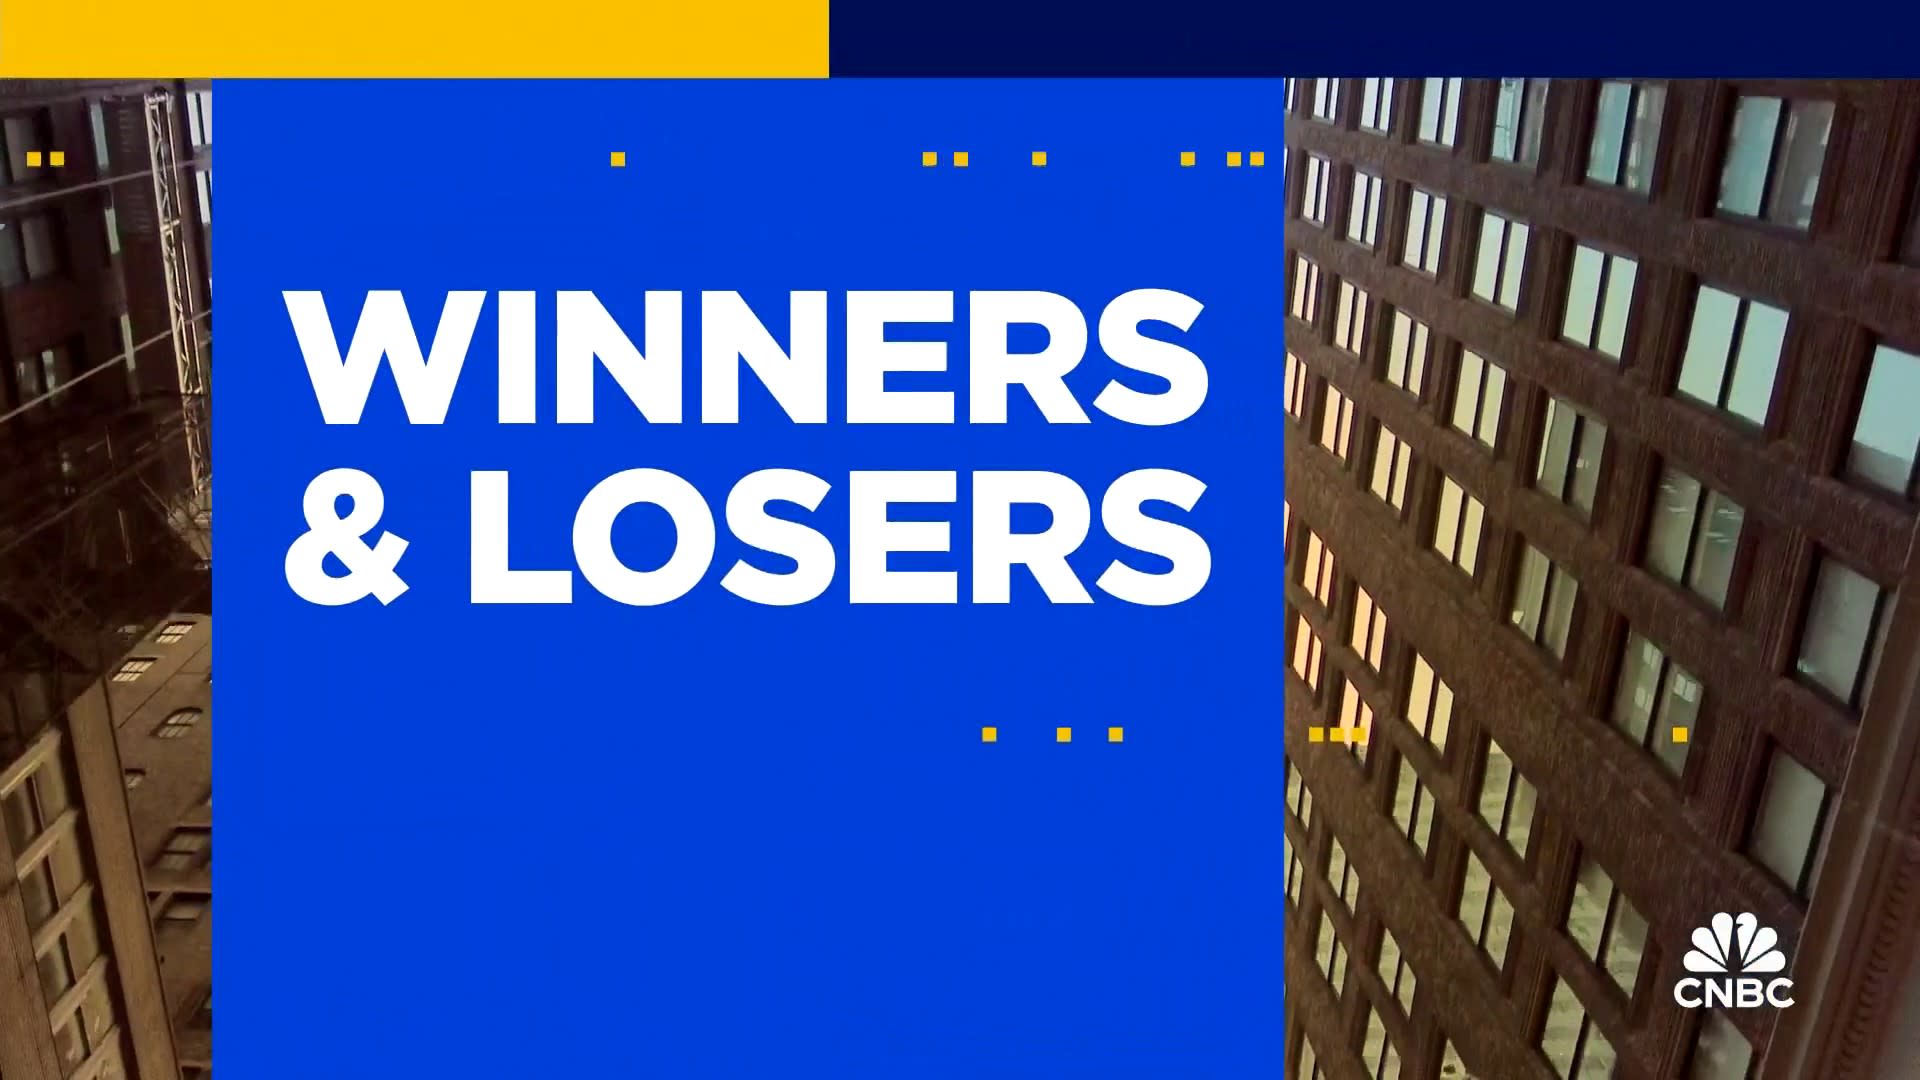 Winners & Losers: The Committee discusses their biggest quarterly movers